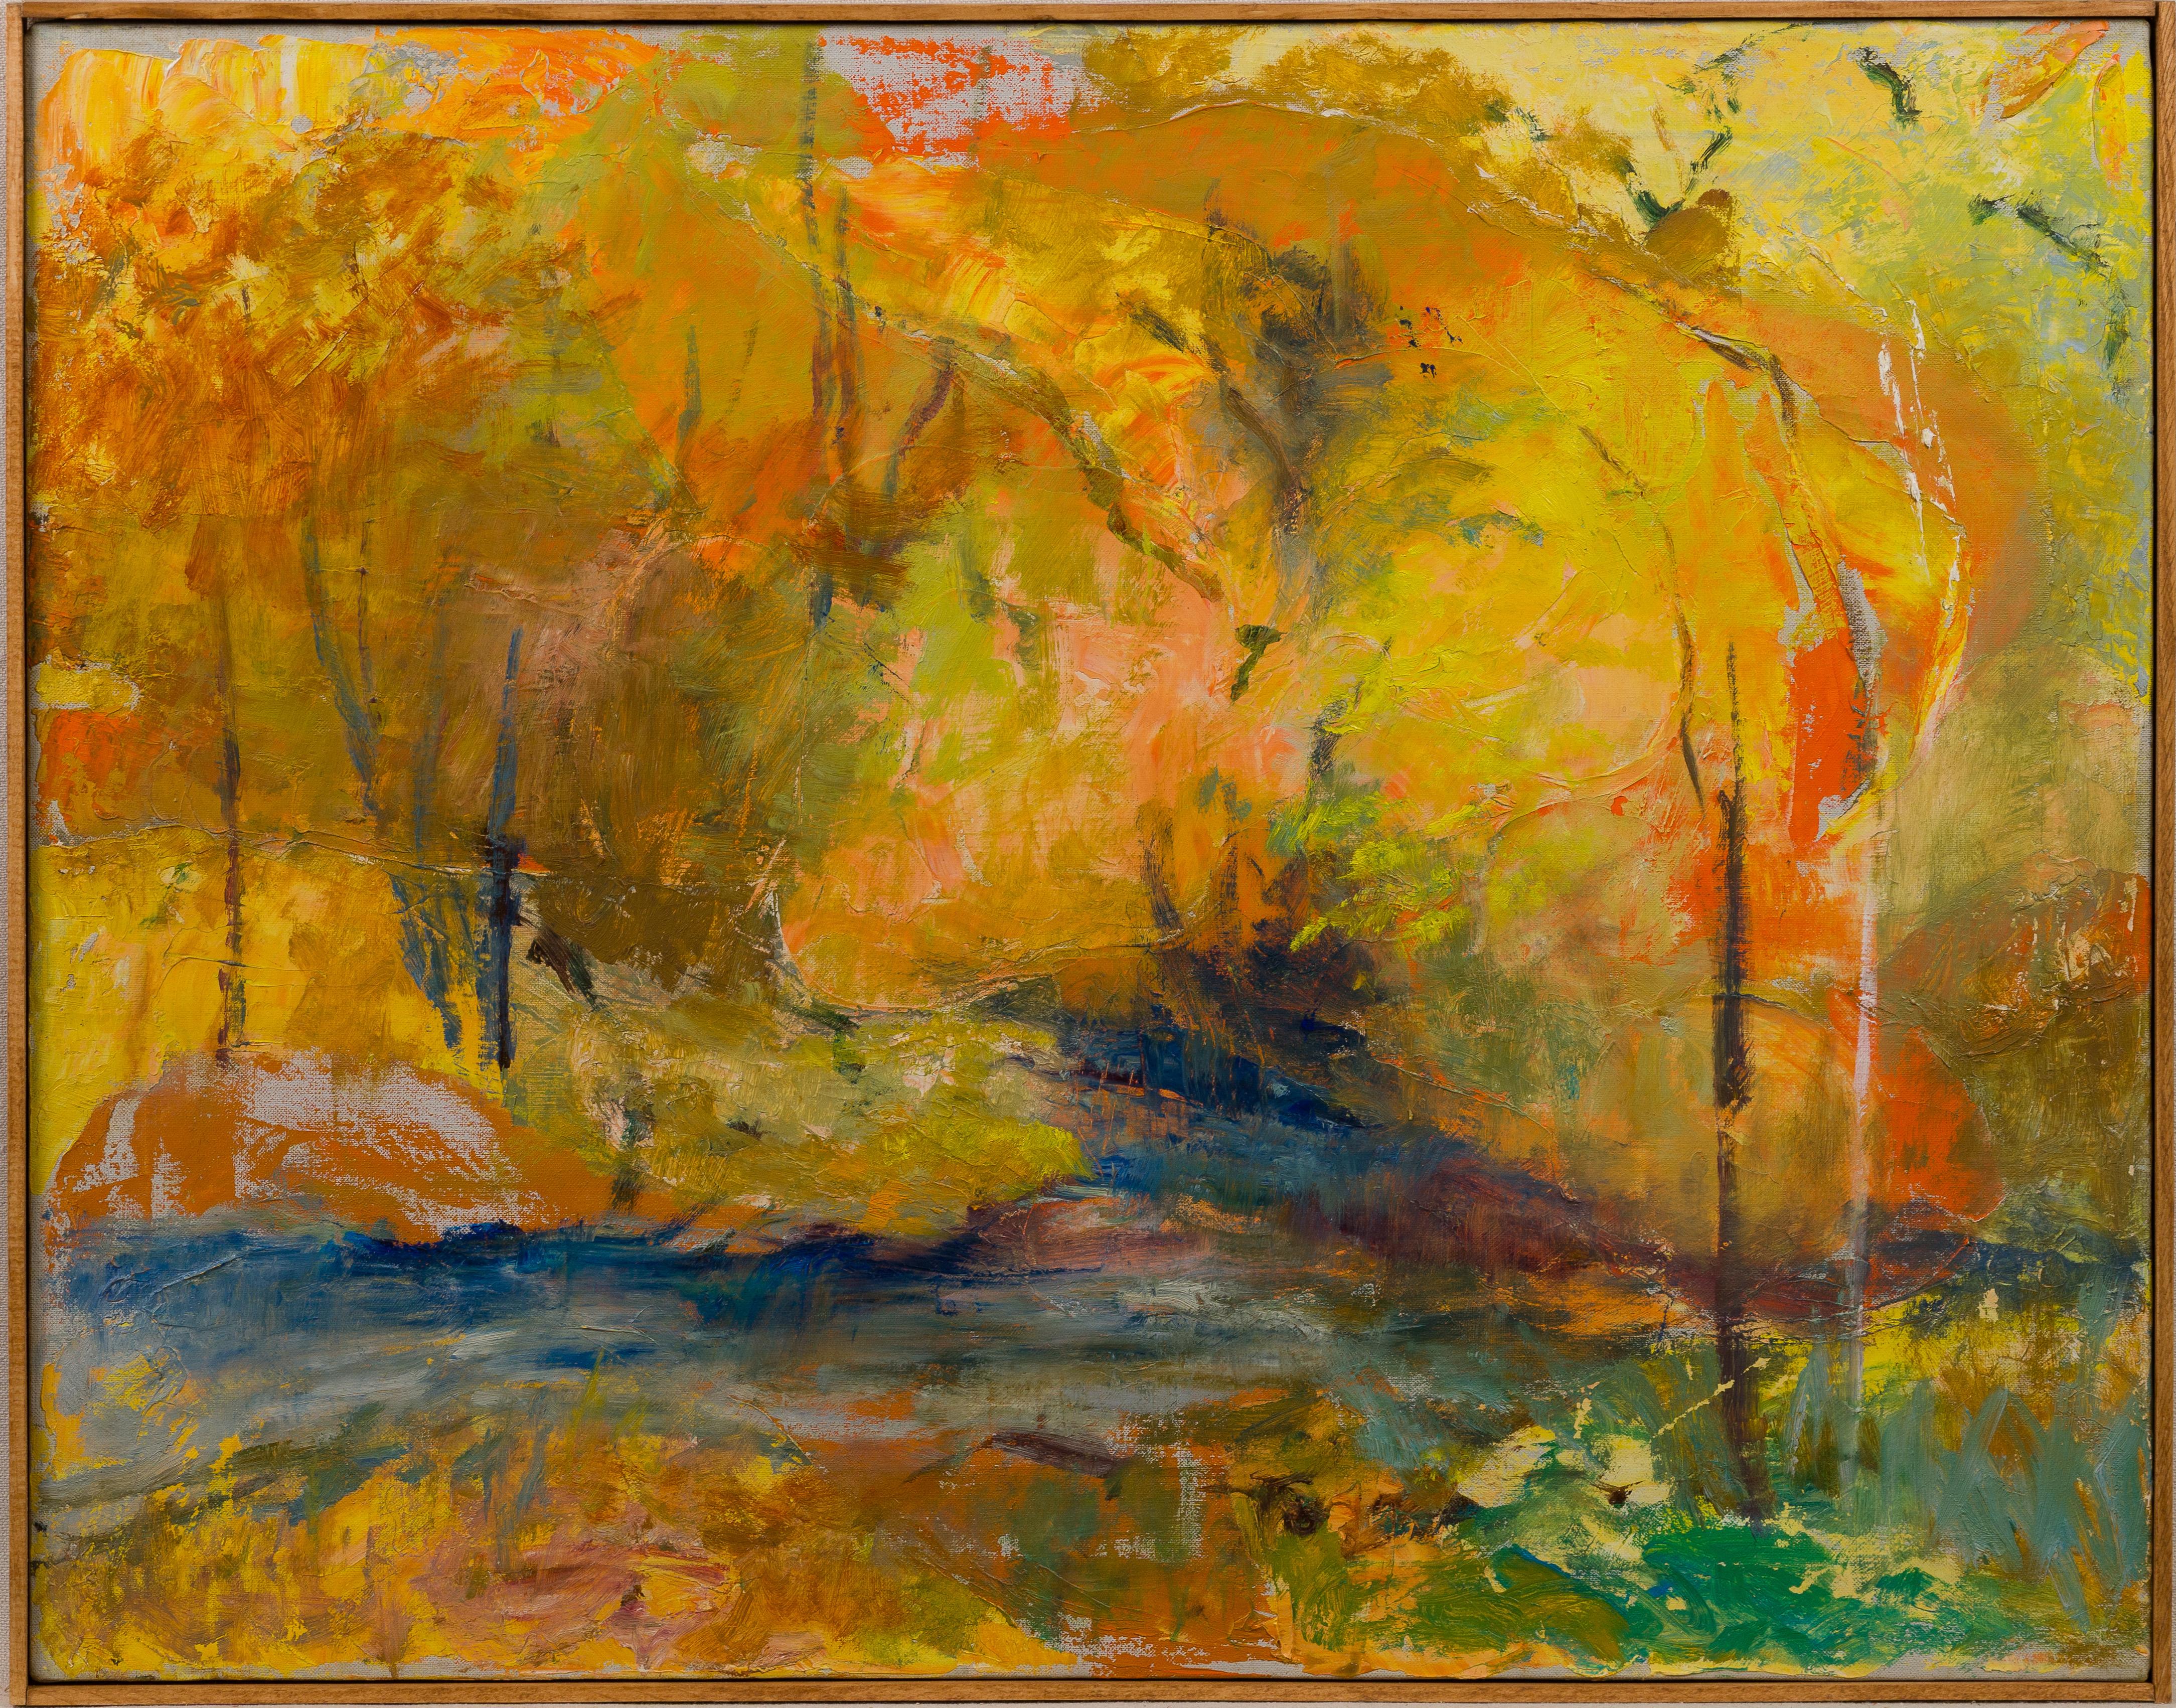 Step into the captivating embrace of autumn with this exceptional vintage American School modernist abstract landscape oil painting. This finely painted original work invites you to immerse yourself in the vivid and evocative hues of fall.

Crafted